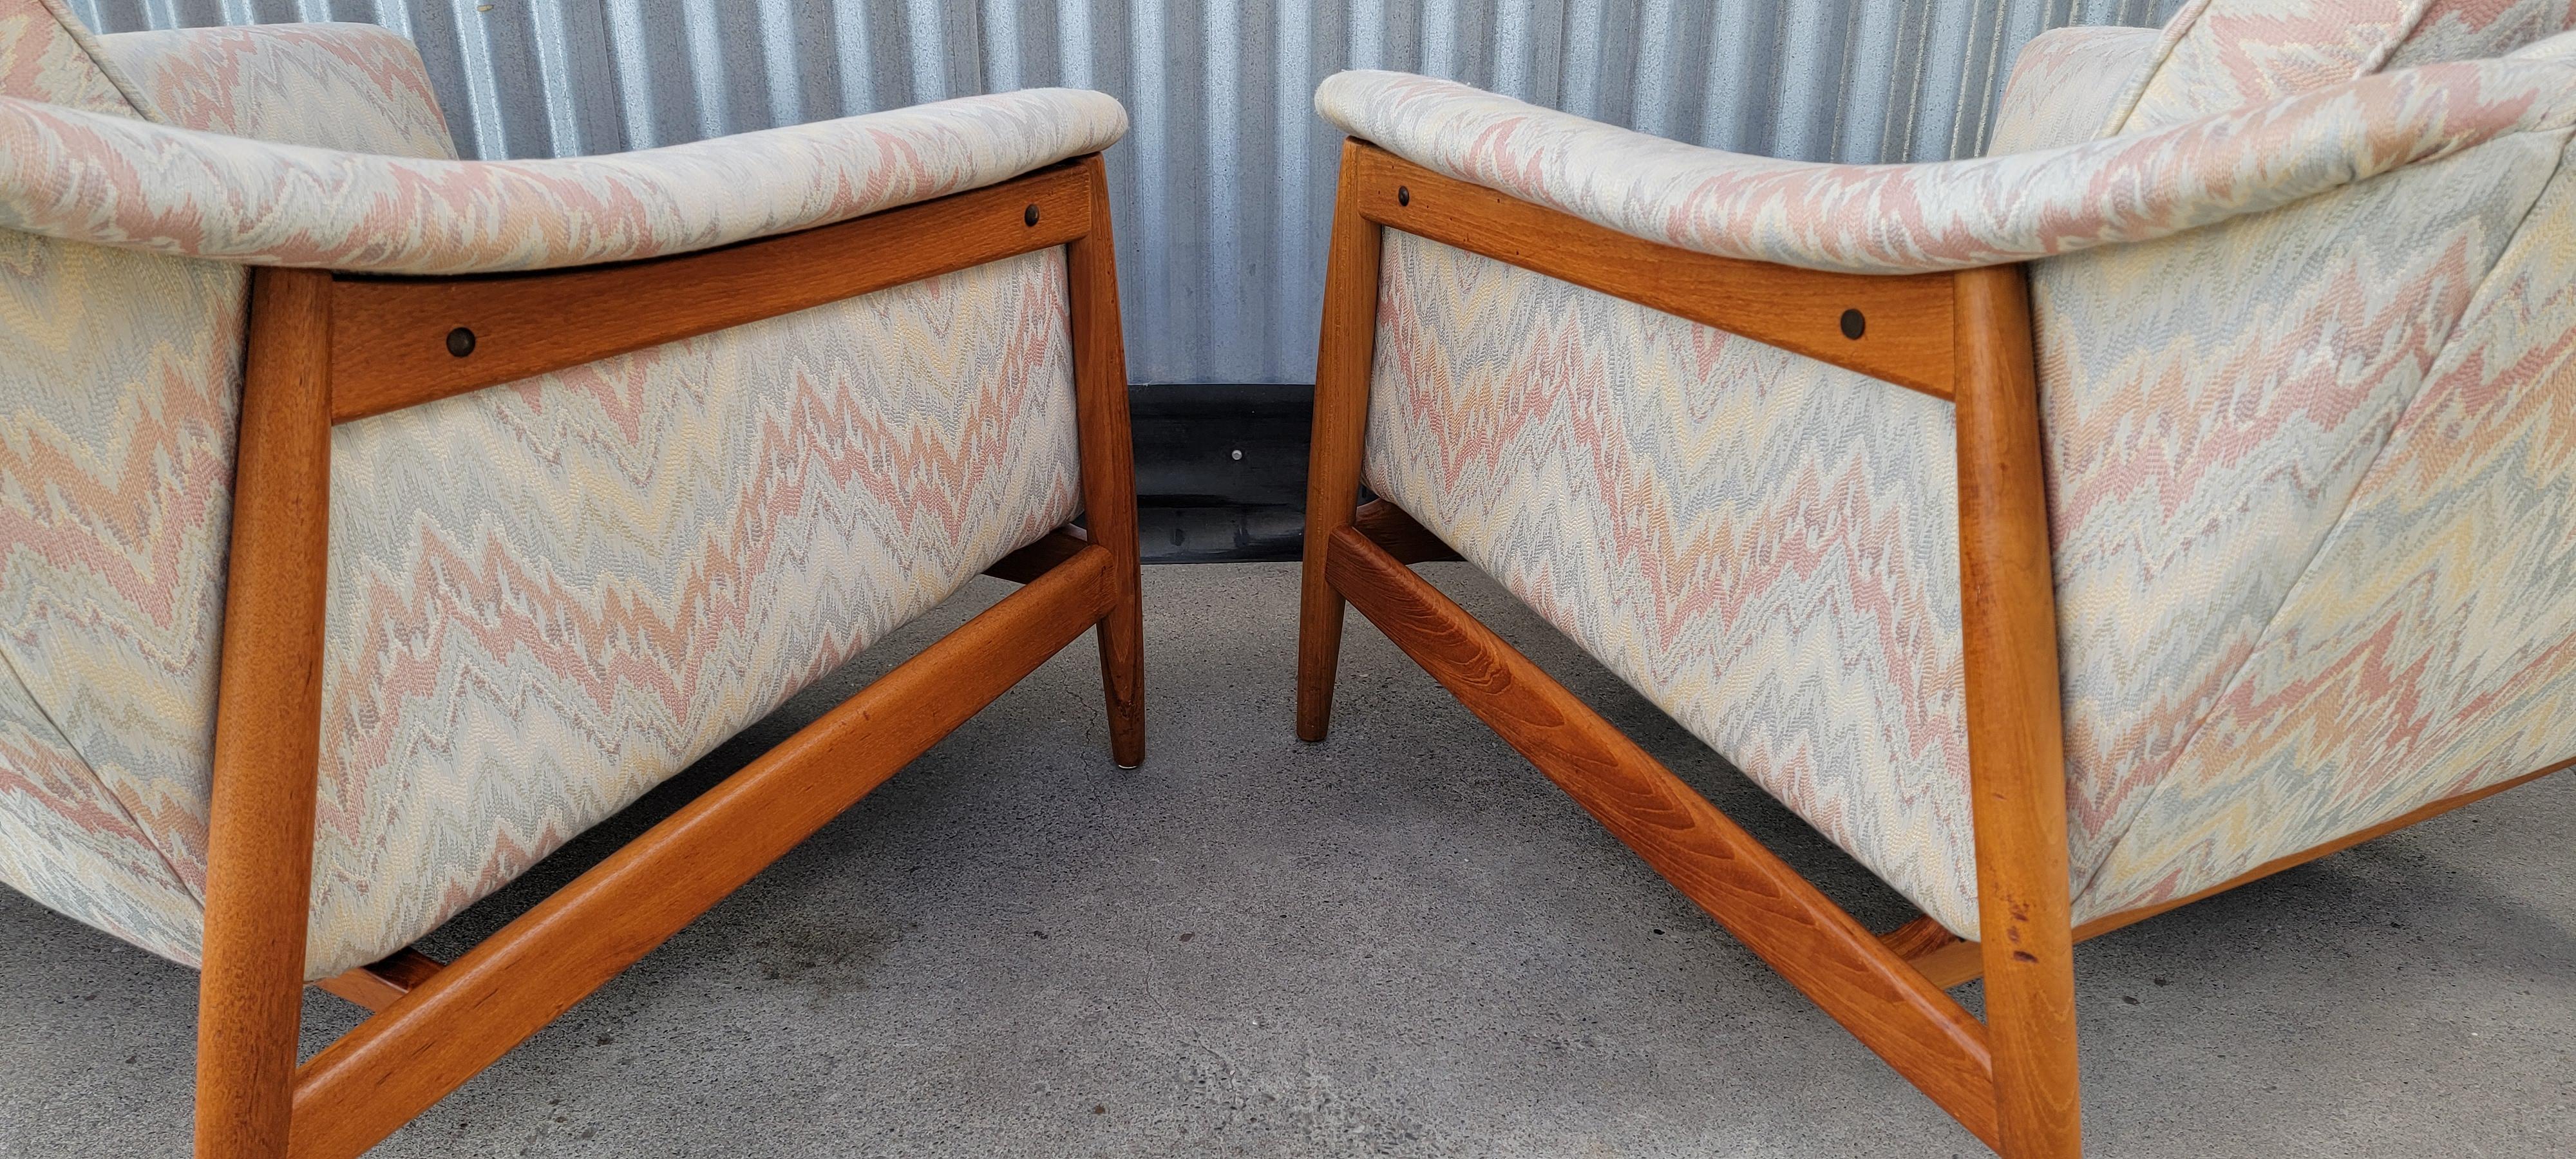 Fabric Folke Ohlsson for DUX Pair Upholstered Teak Lounge Chairs